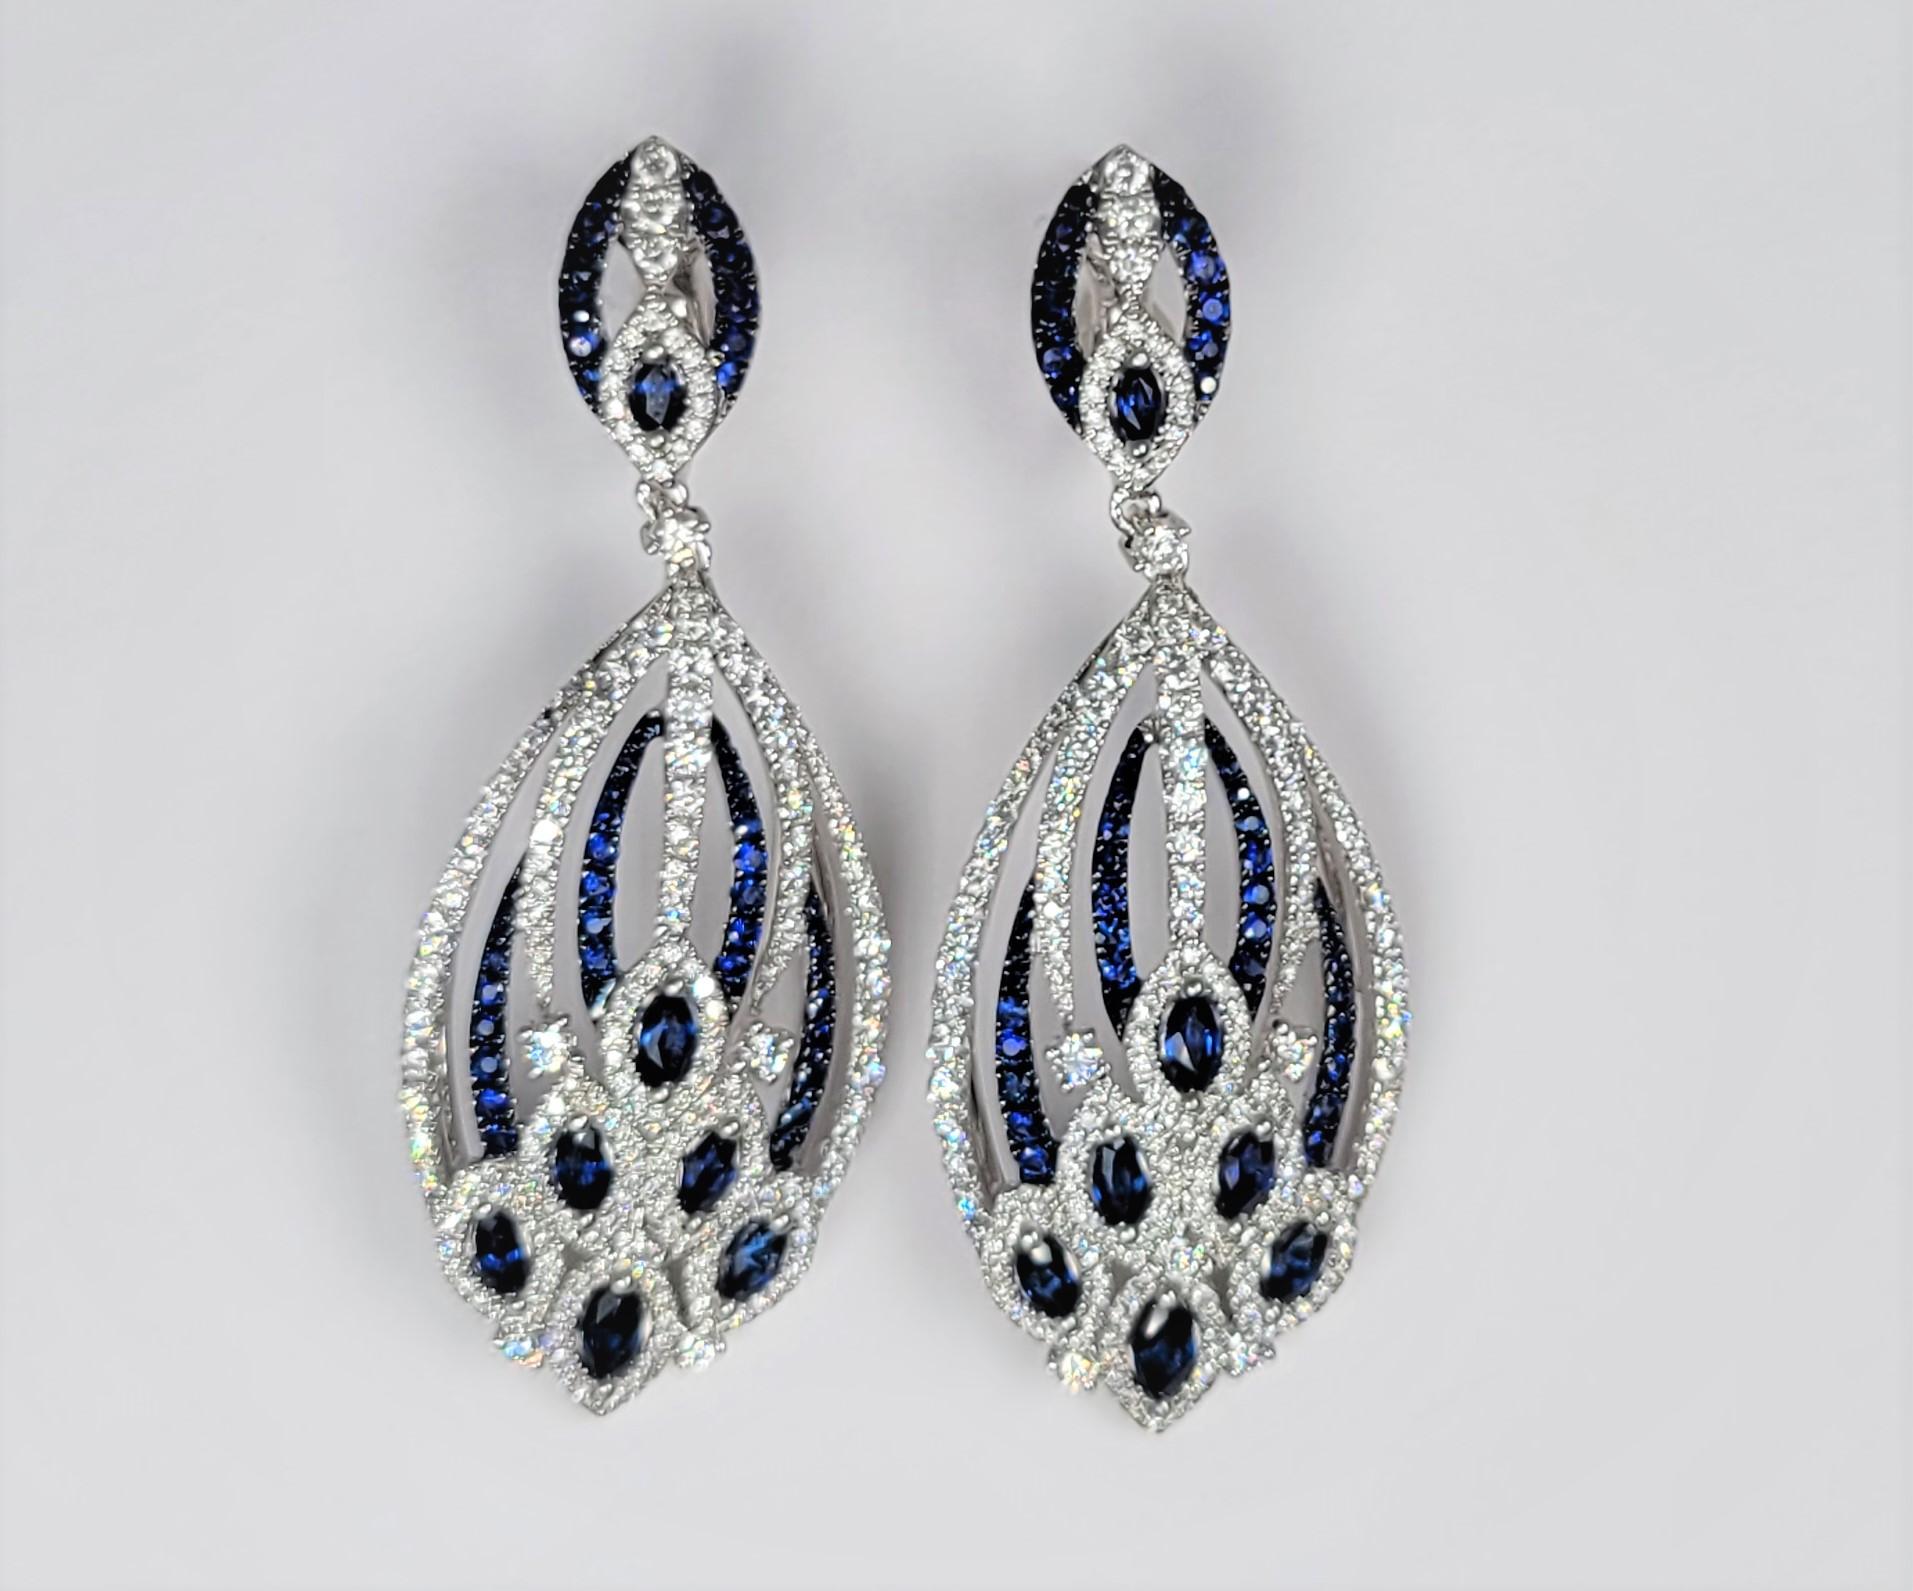 Stunning diamond and blue sapphire earrings in 18 karat white gold.  Black rhodium accentuates the blue sapphires.  Stamped LTJ.